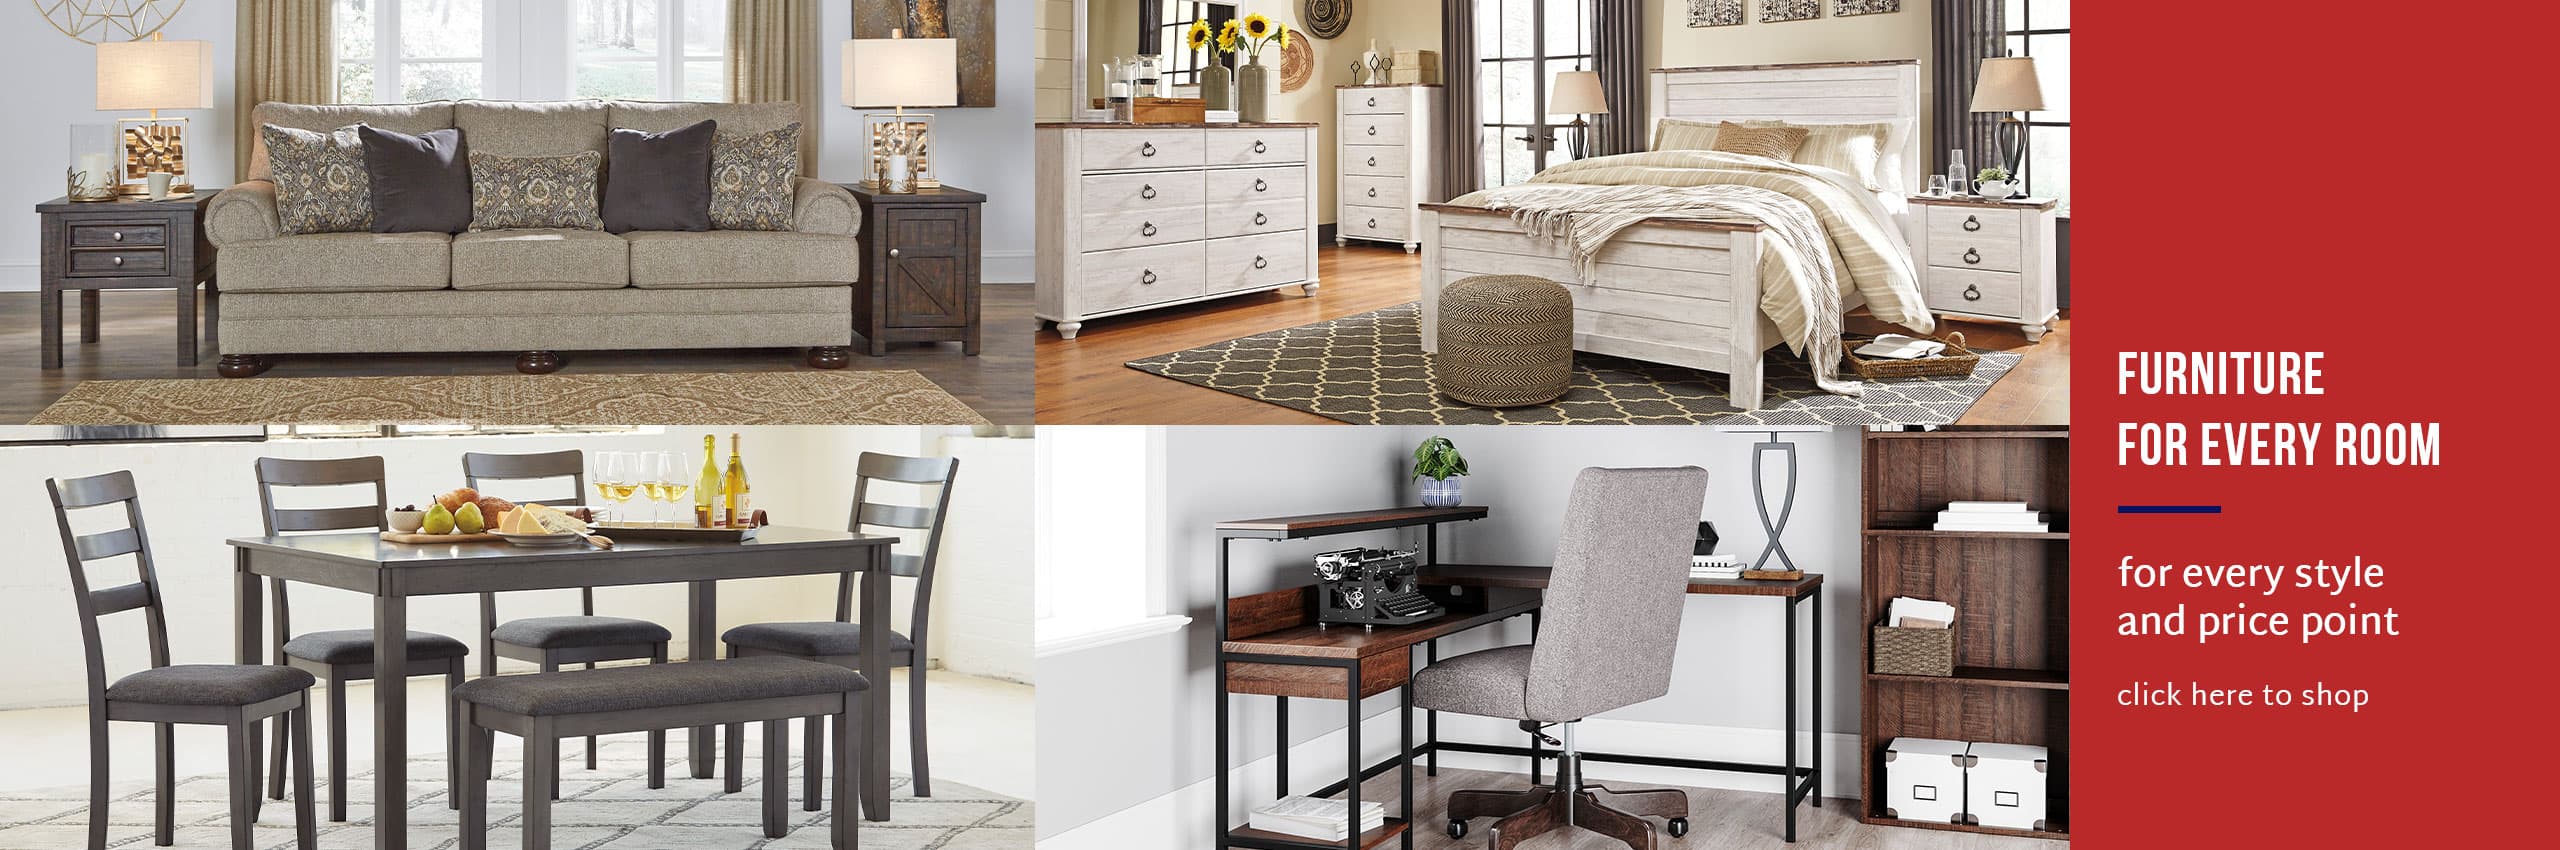 Furniture for every room